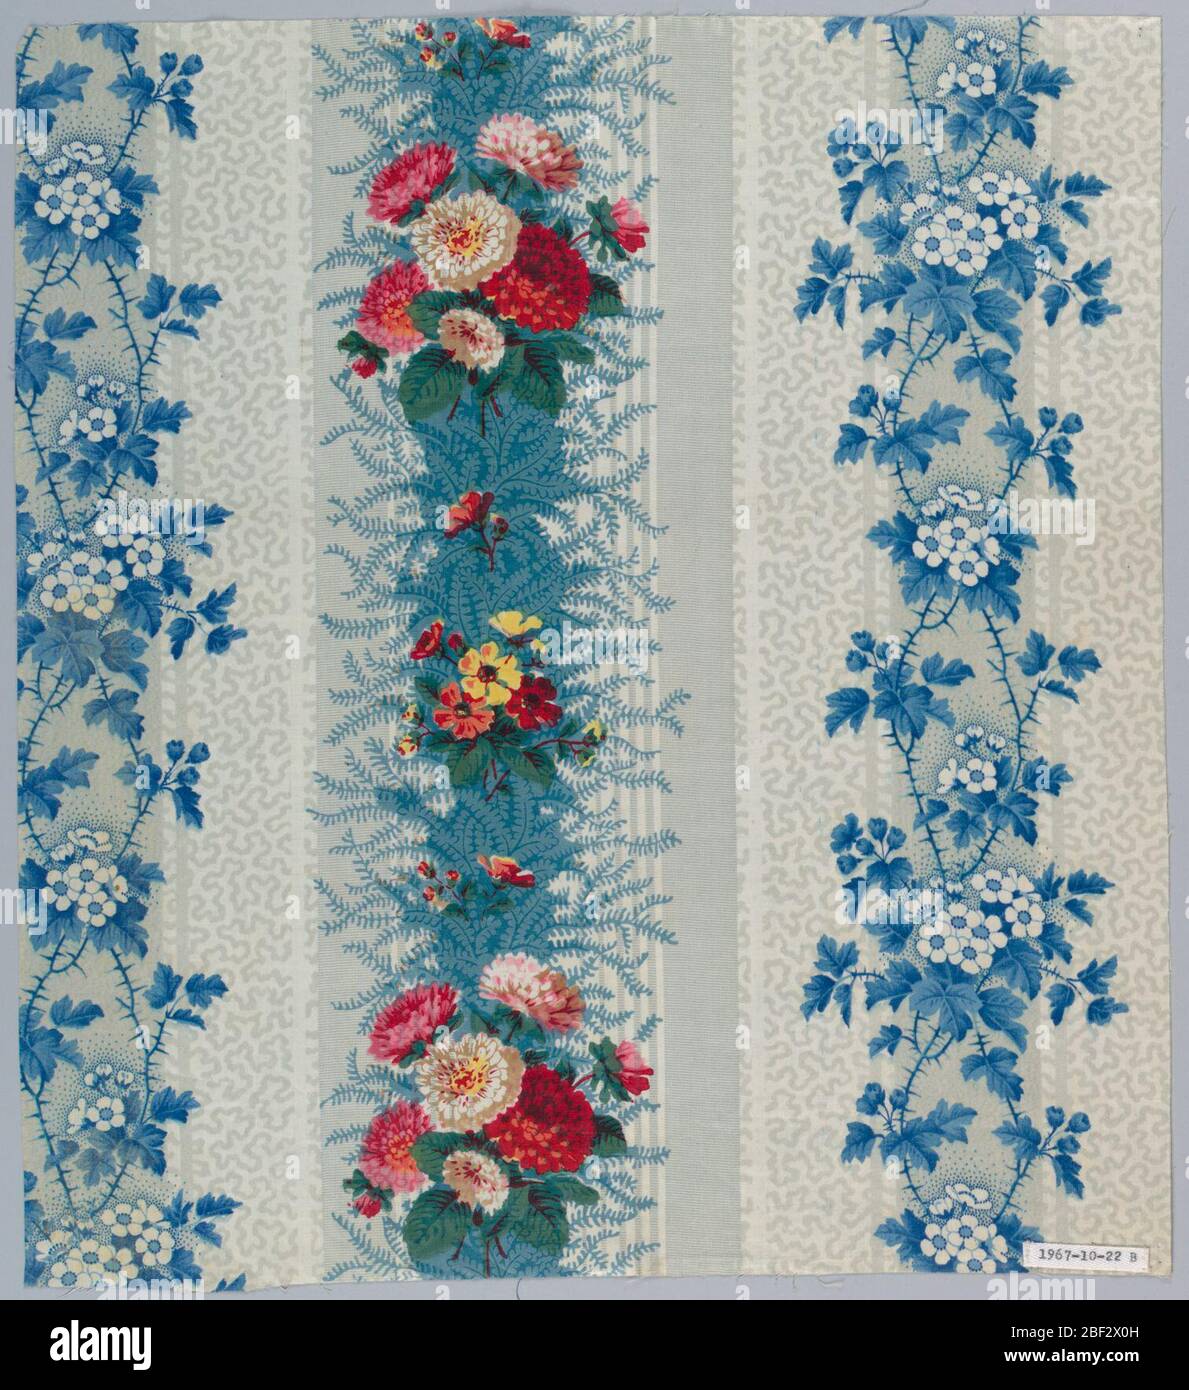 Textile. Sample in similar pattern to A with grey striped ground, vermicular pattern in grey, blue vine and white flowers, and stripe over-printed with close clusters of pink and red carnations, and smaller flower, rgeen foliage. Stock Photo